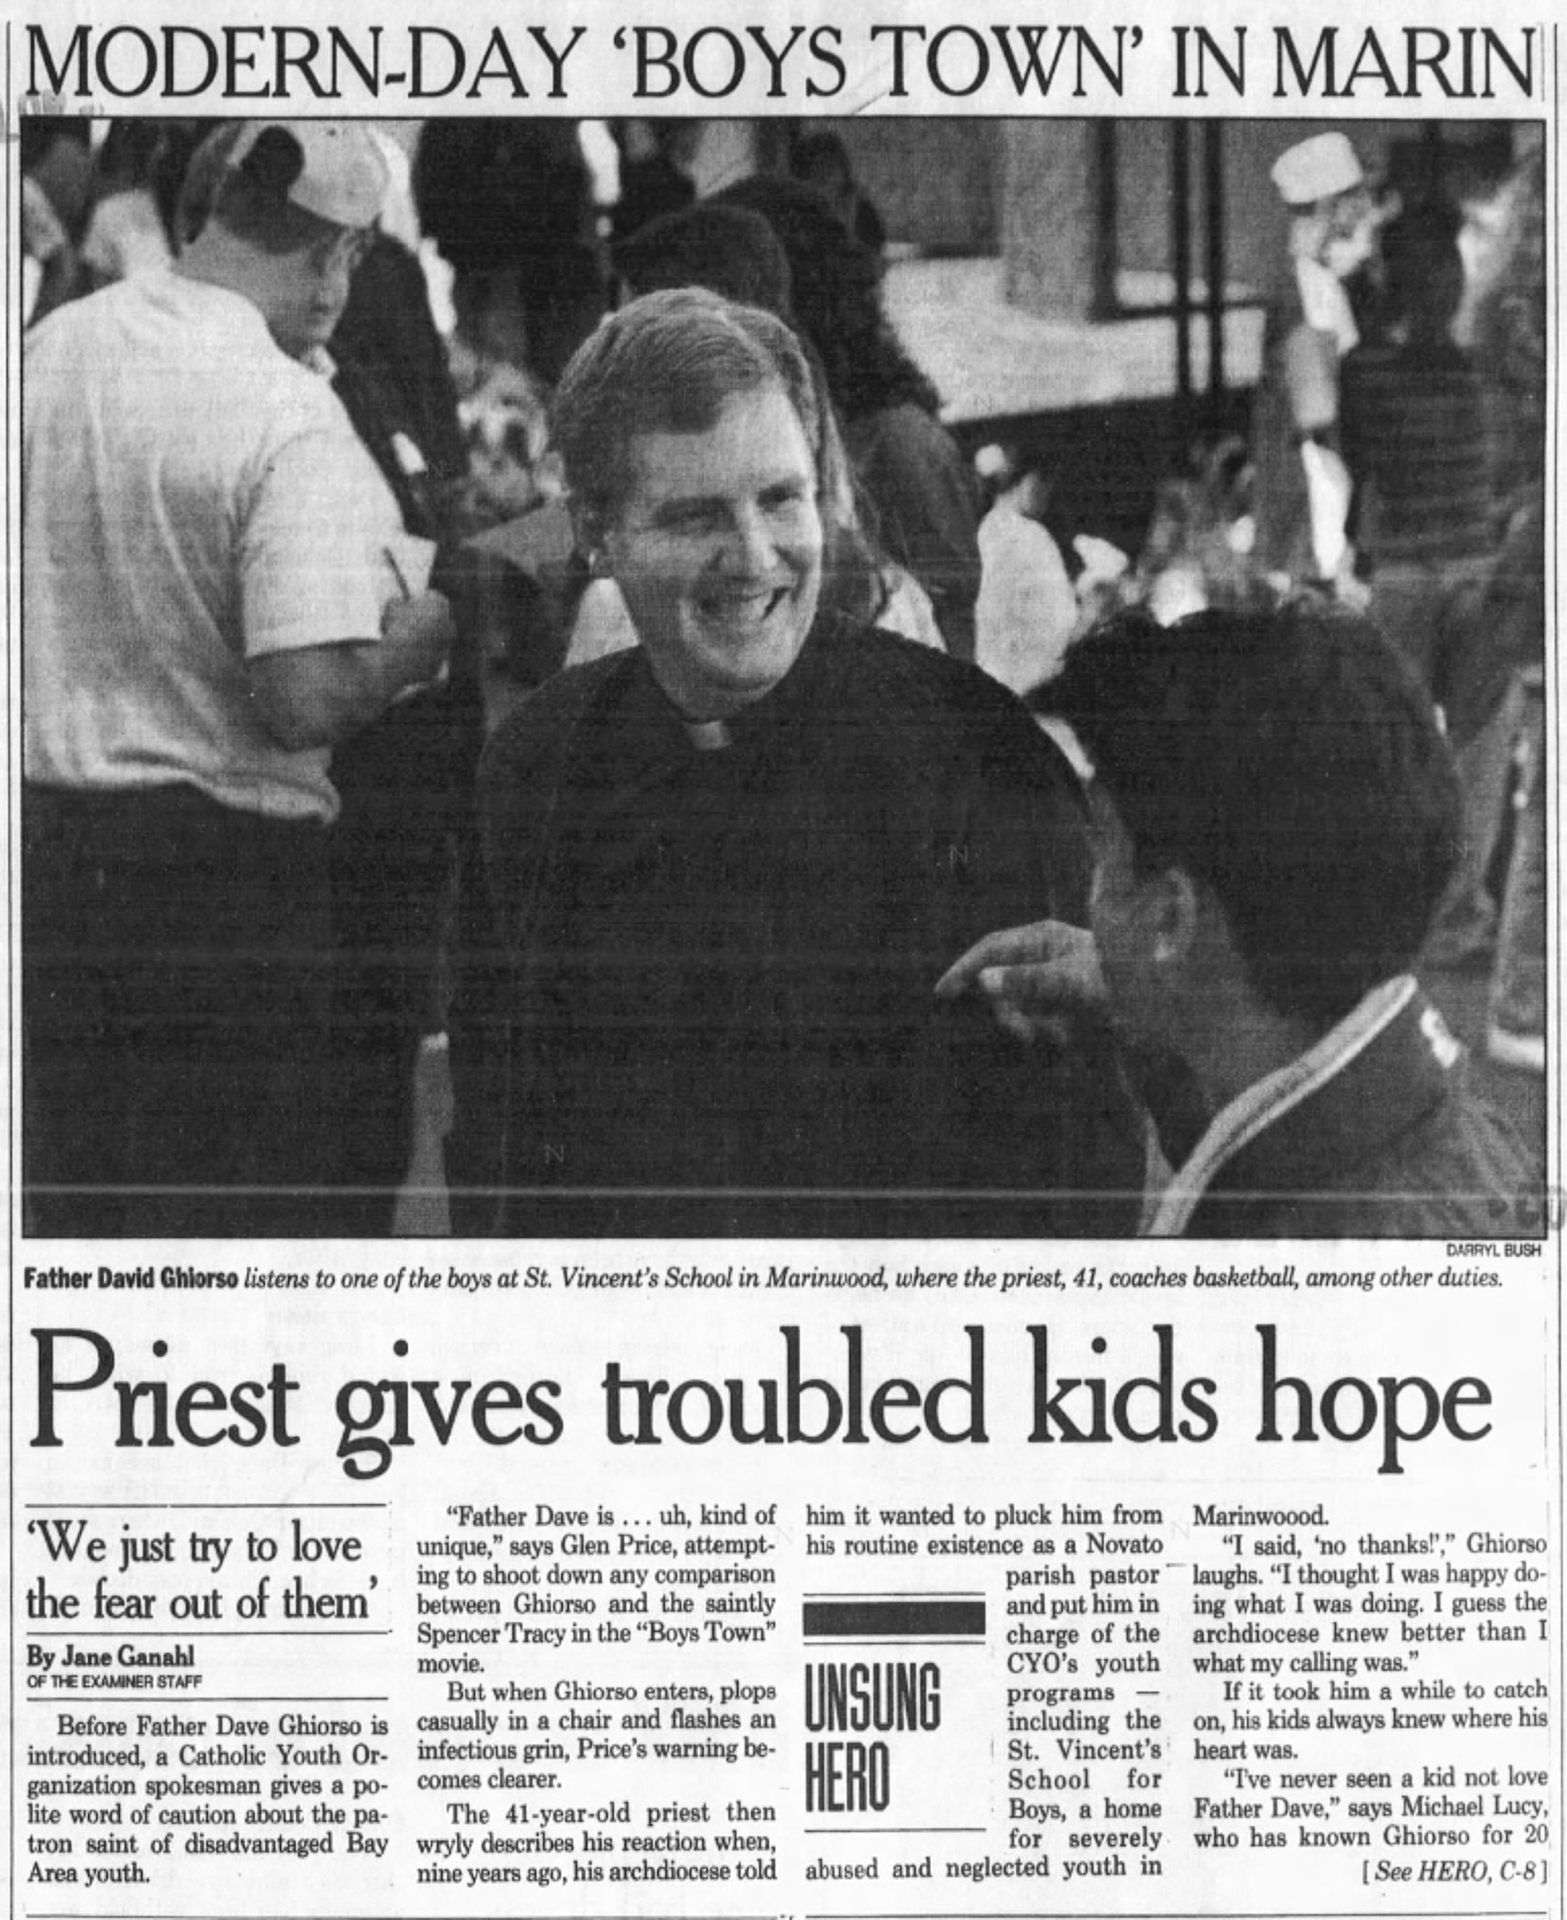 A newspaper clipping with a photo of a priest smiling while talking to a person facing him.